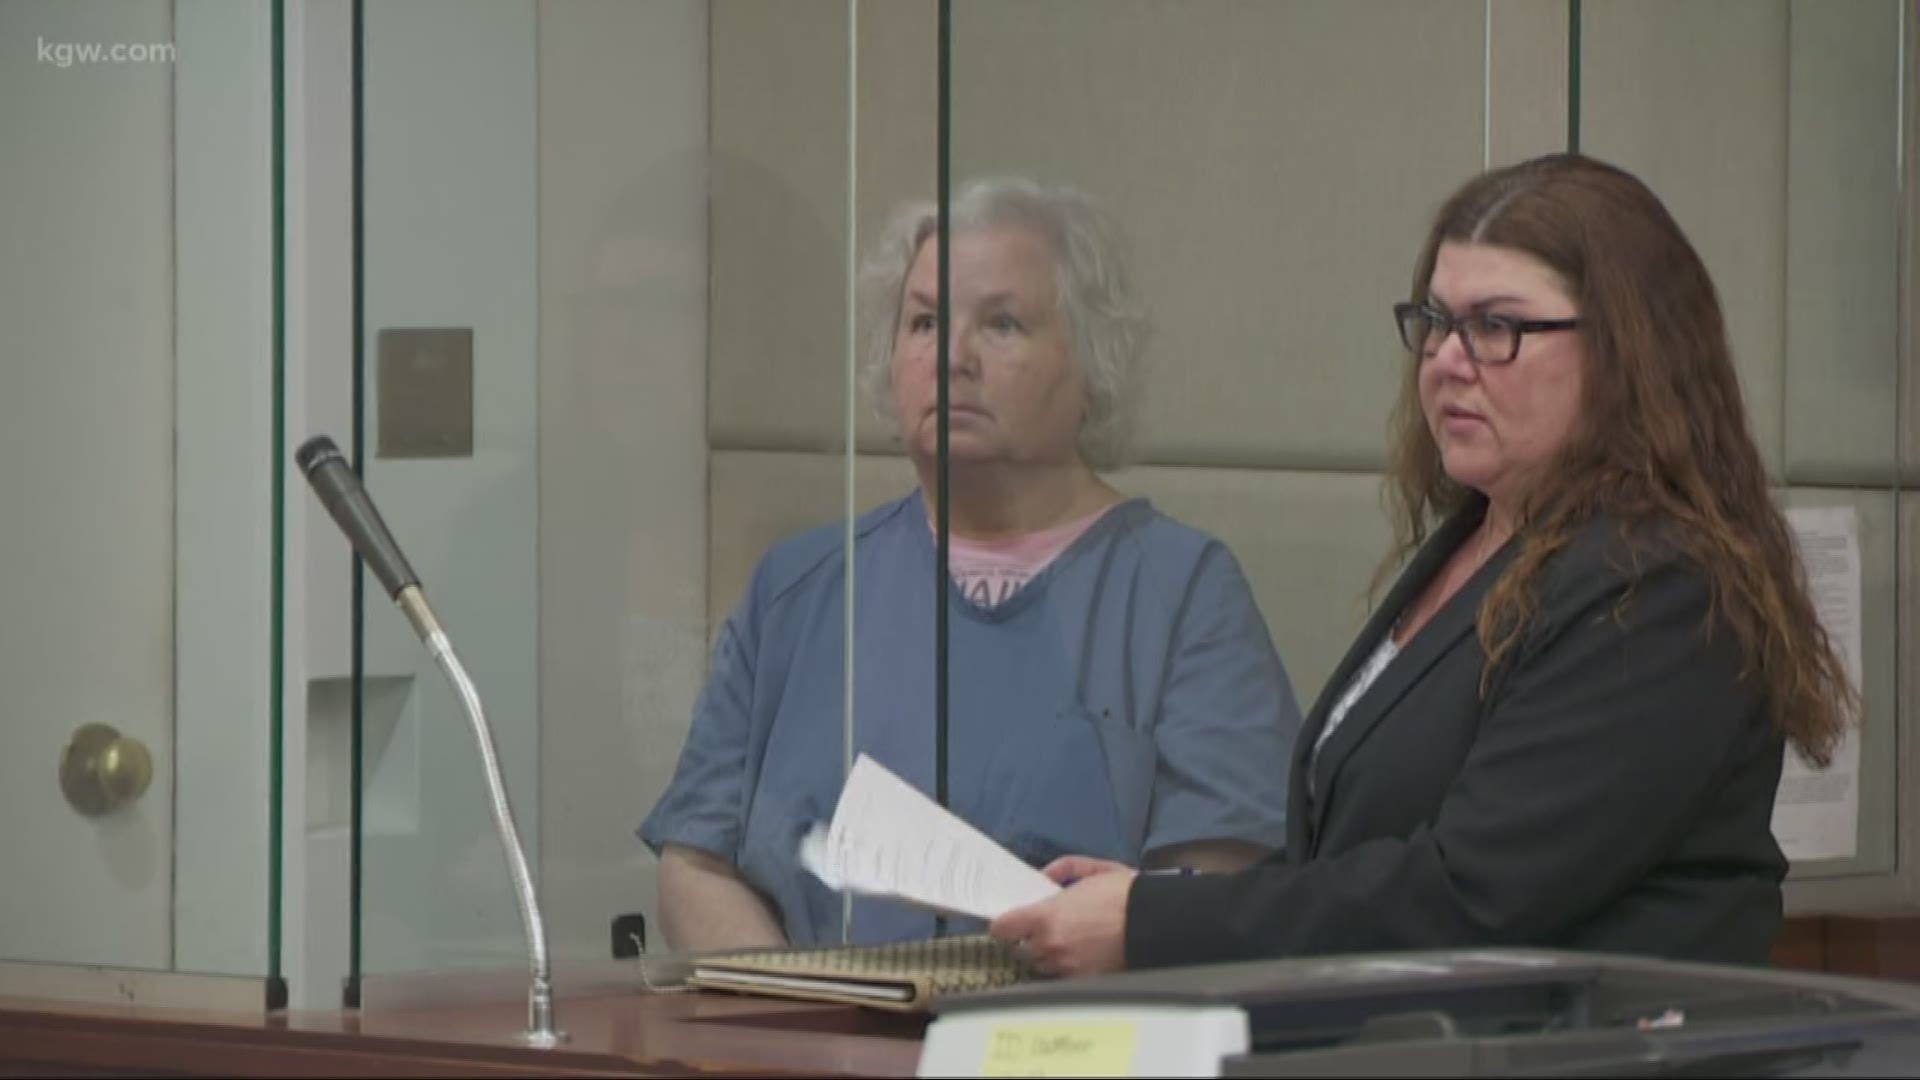 The wife of Oregon Culinary Institute chef Daniel Brophy appears in court to face charges for his murder.